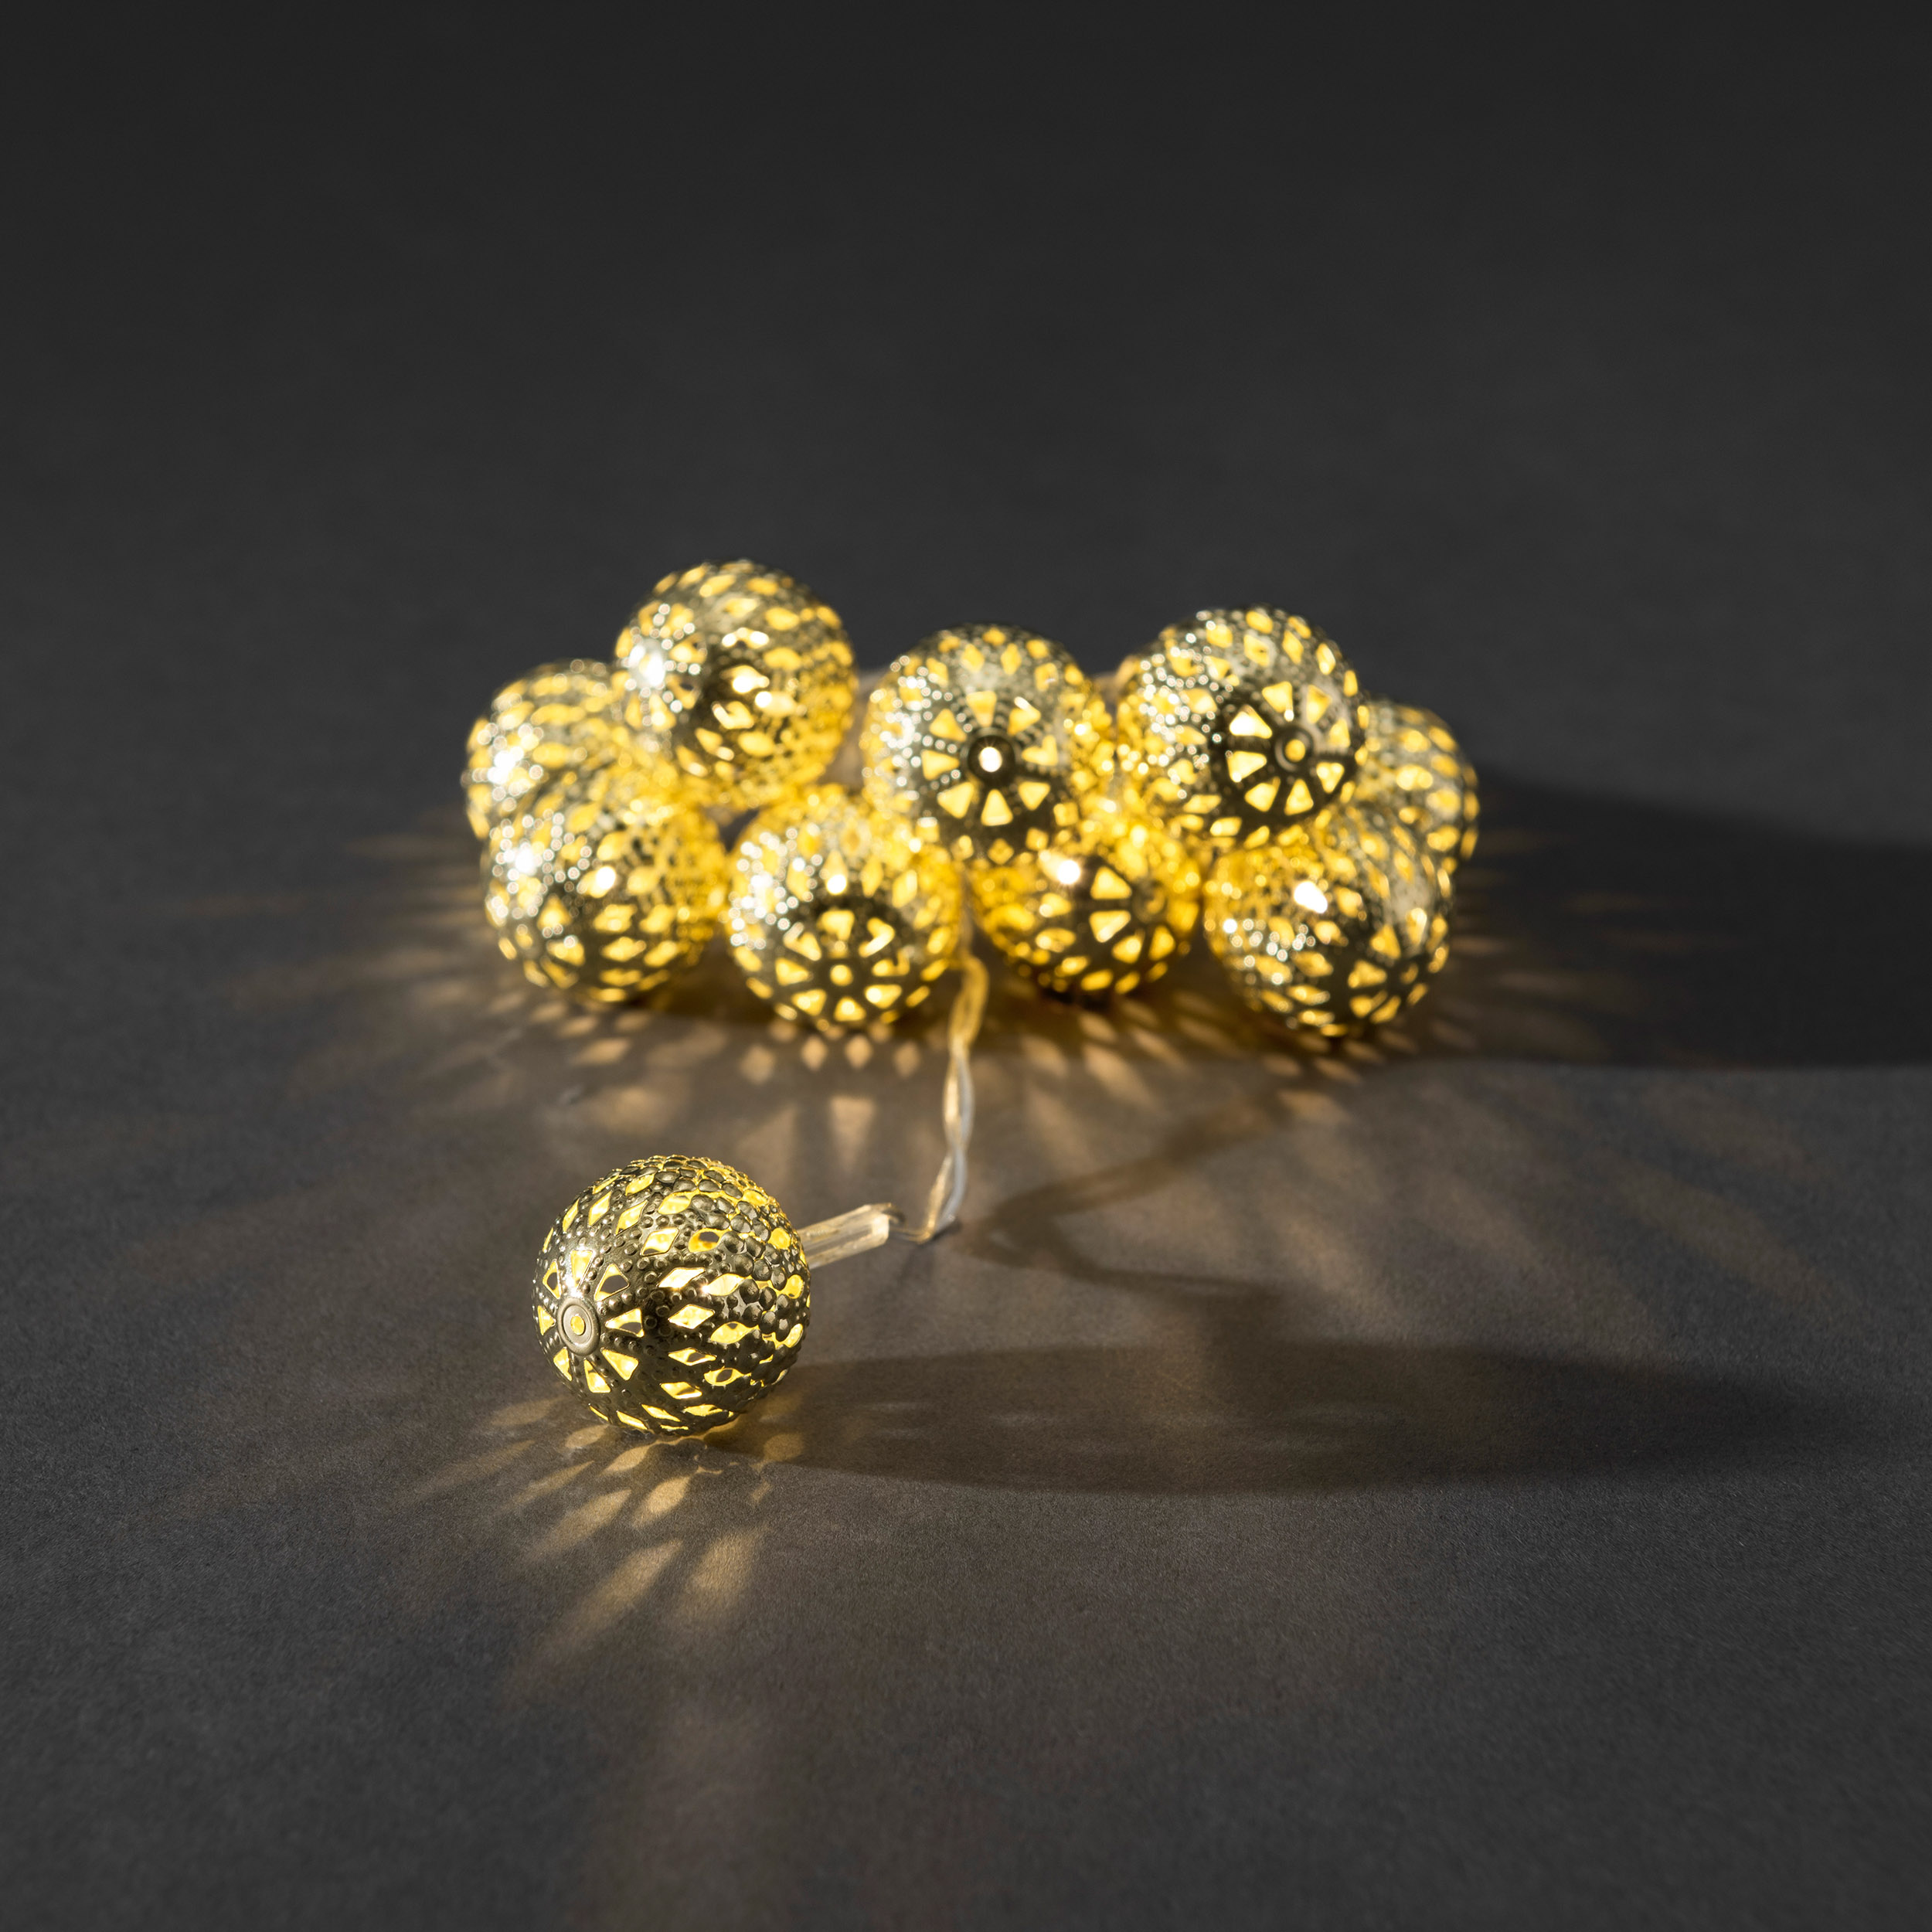 Decorative LED light set with gold-coloured metal beads